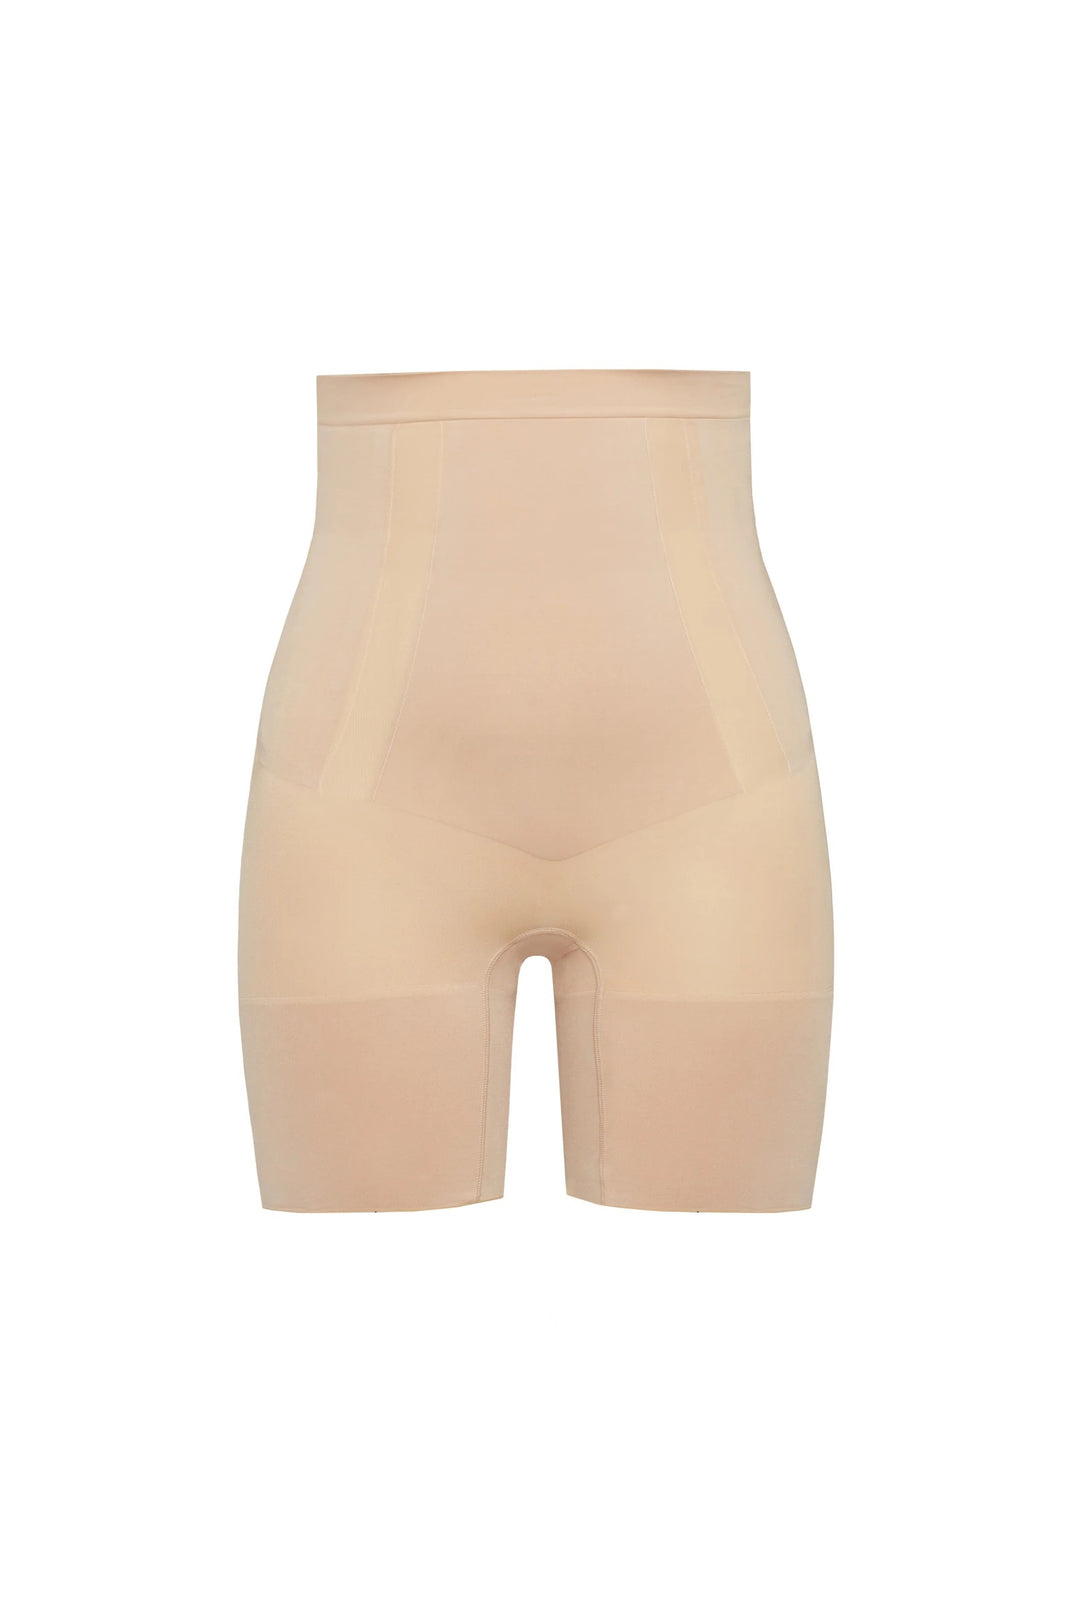 Spanx Oncore Soft Nude High Waisted Mid-thigh Shorts Size Small